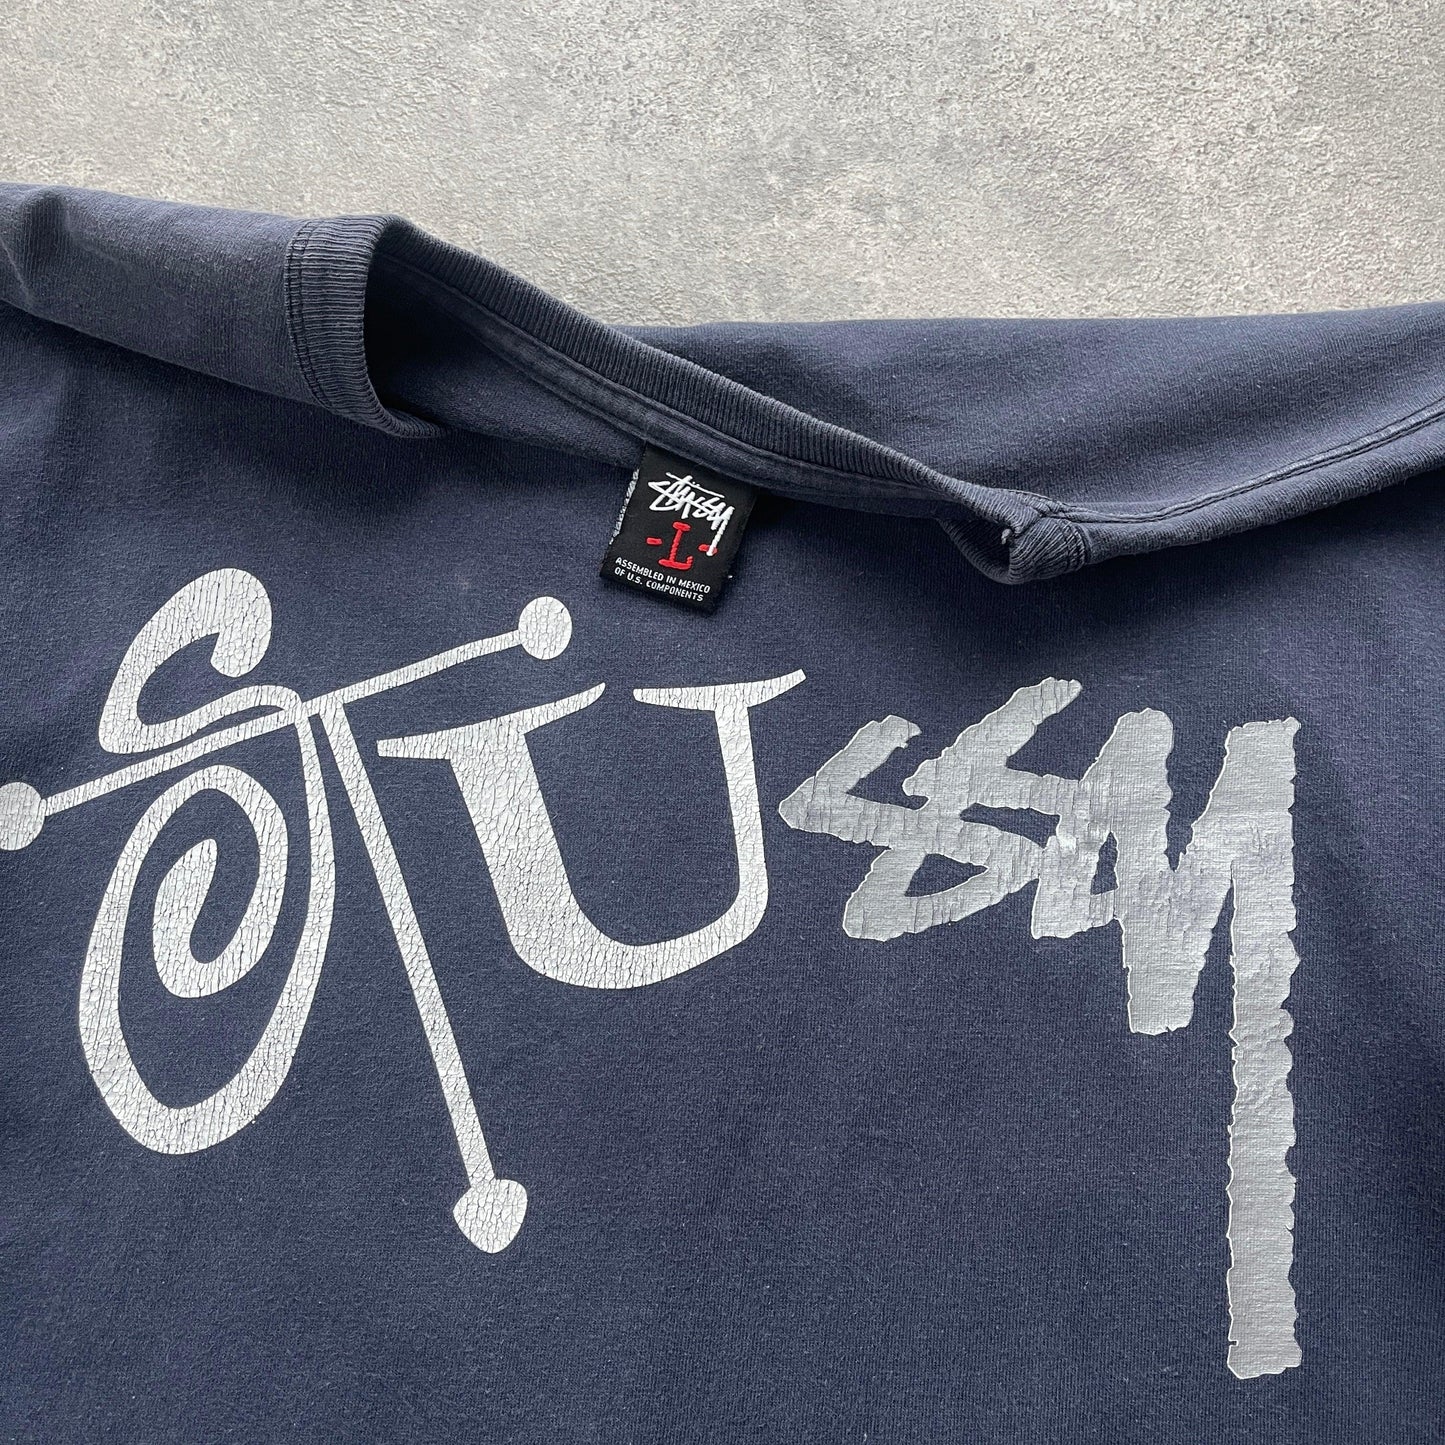 Stussy 2000s heavyweight graphic t-shirt (L) - Known Source